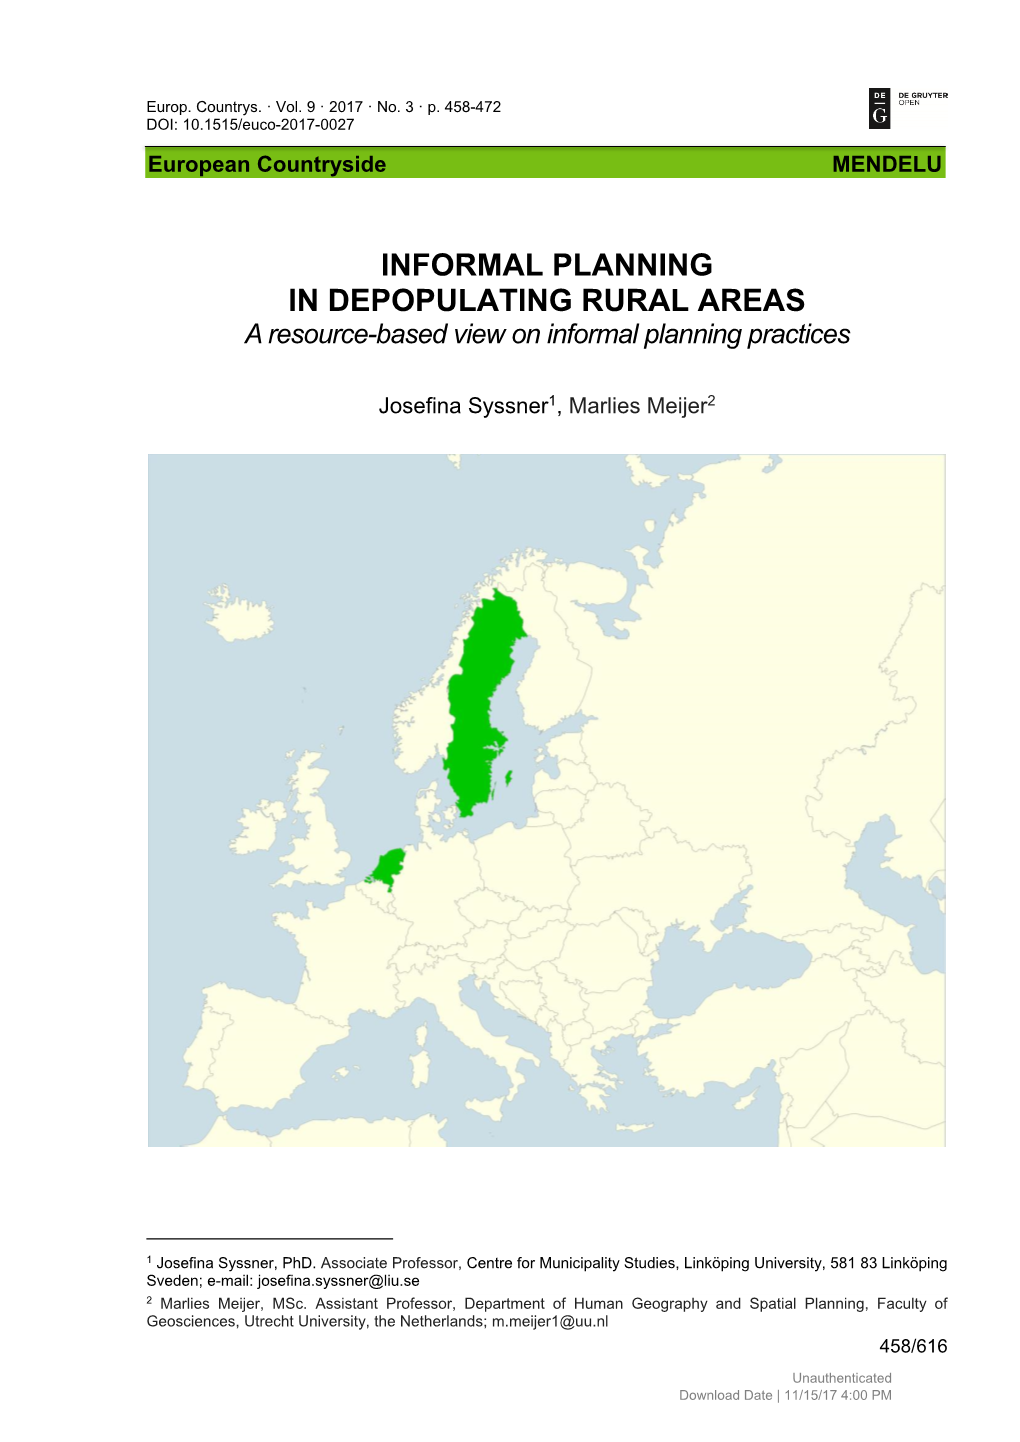 INFORMAL PLANNING in DEPOPULATING RURAL AREAS a Resource-Based View on Informal Planning Practices